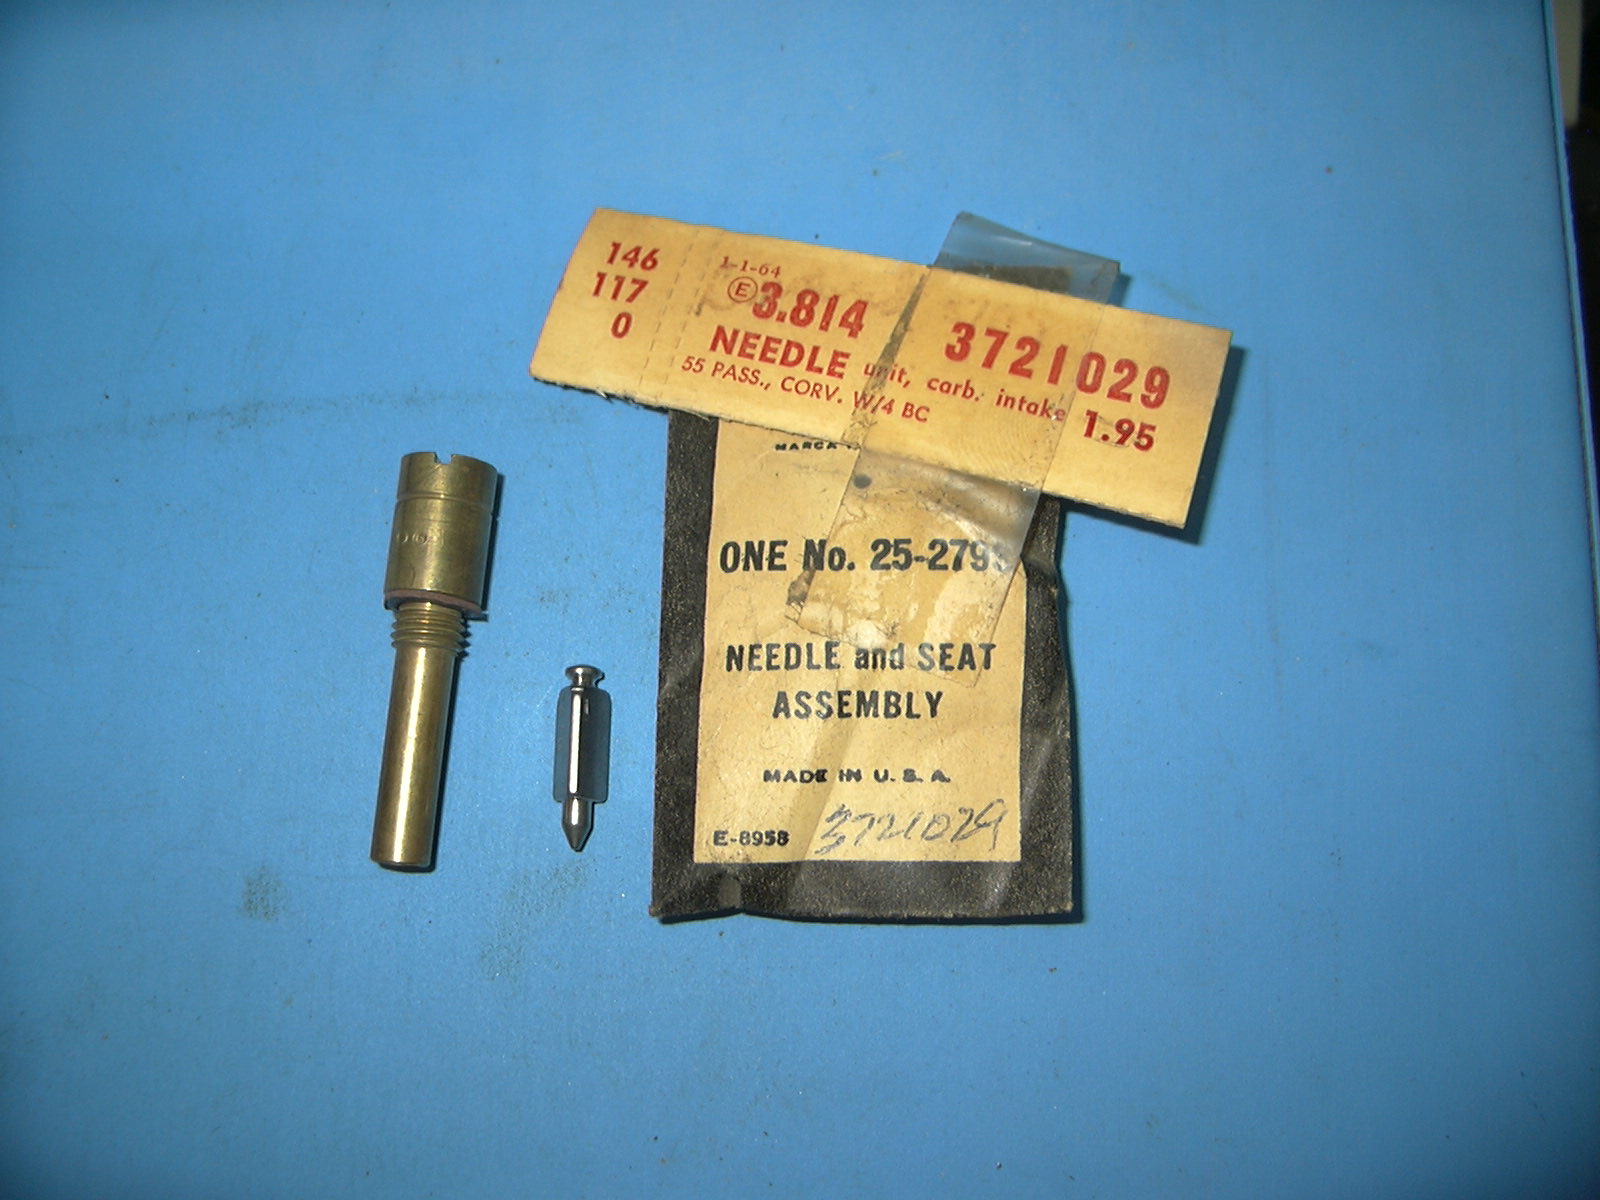 1955 Chevrolet Carburetor Needle and Seat (Carter) NOS # 3721029